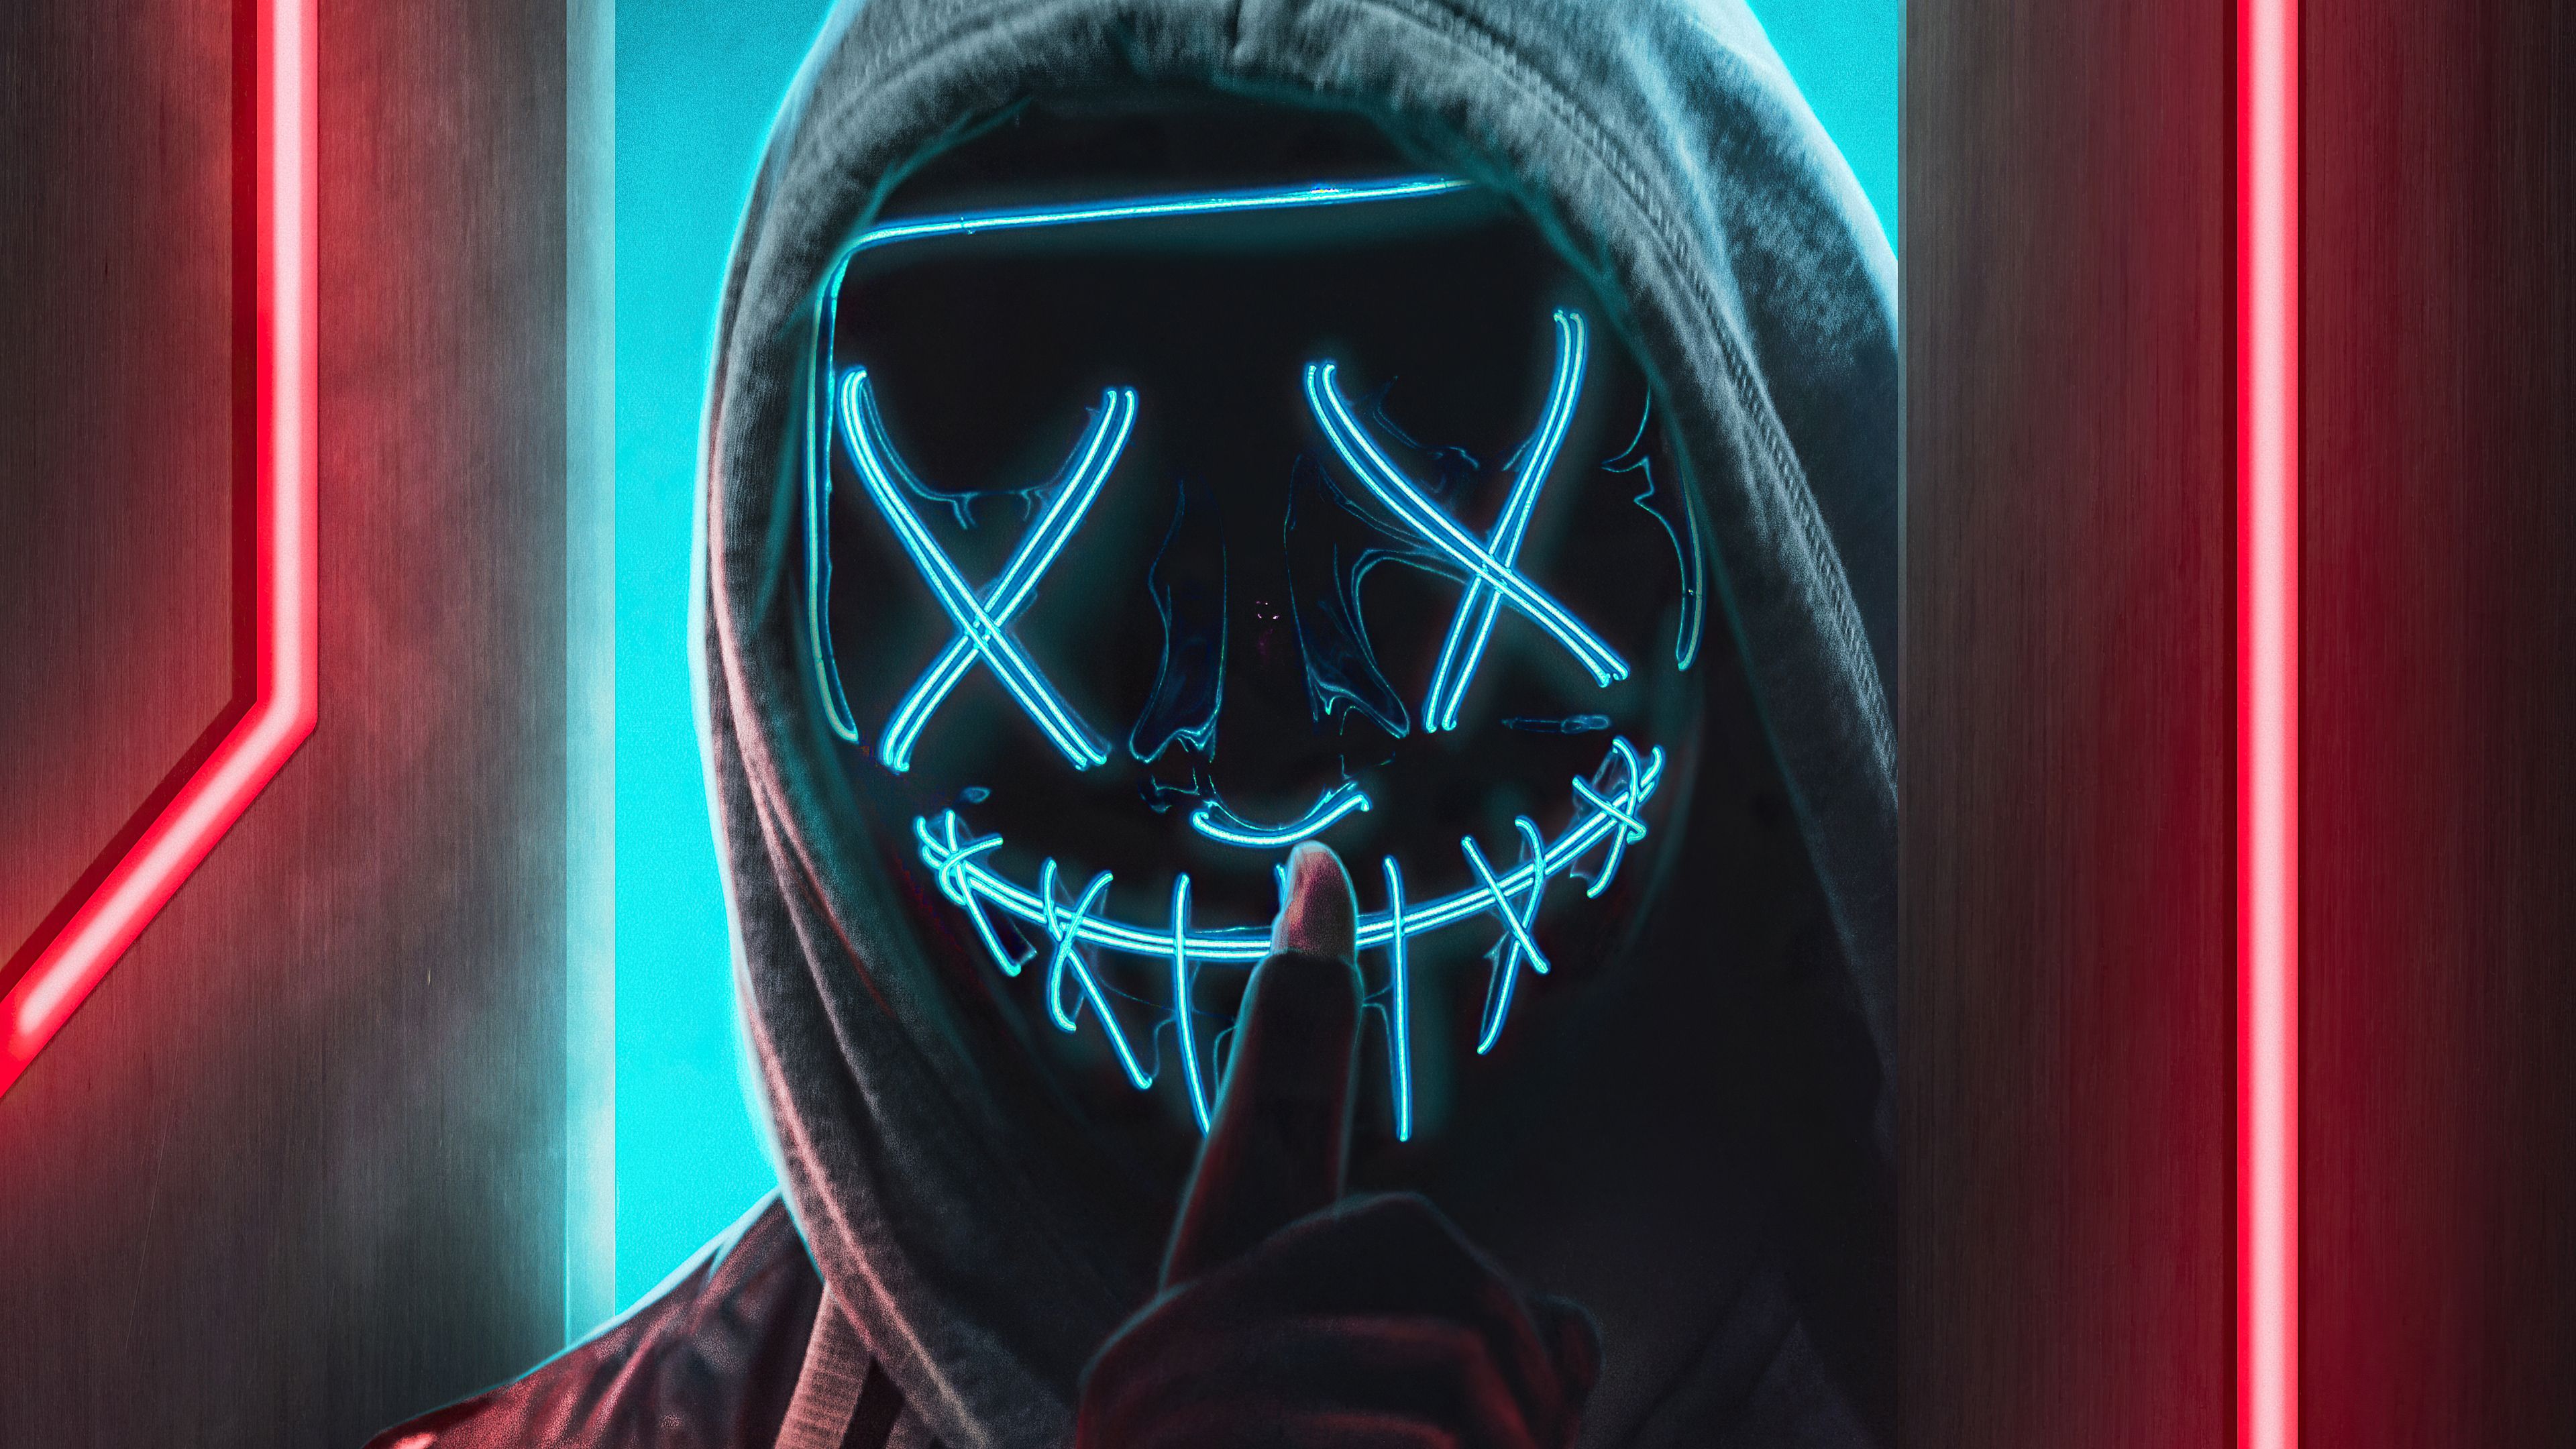 Ssh Mask Glowing Boy 4k, HD Artist, 4k Wallpaper, Image, Background, Photo and Picture